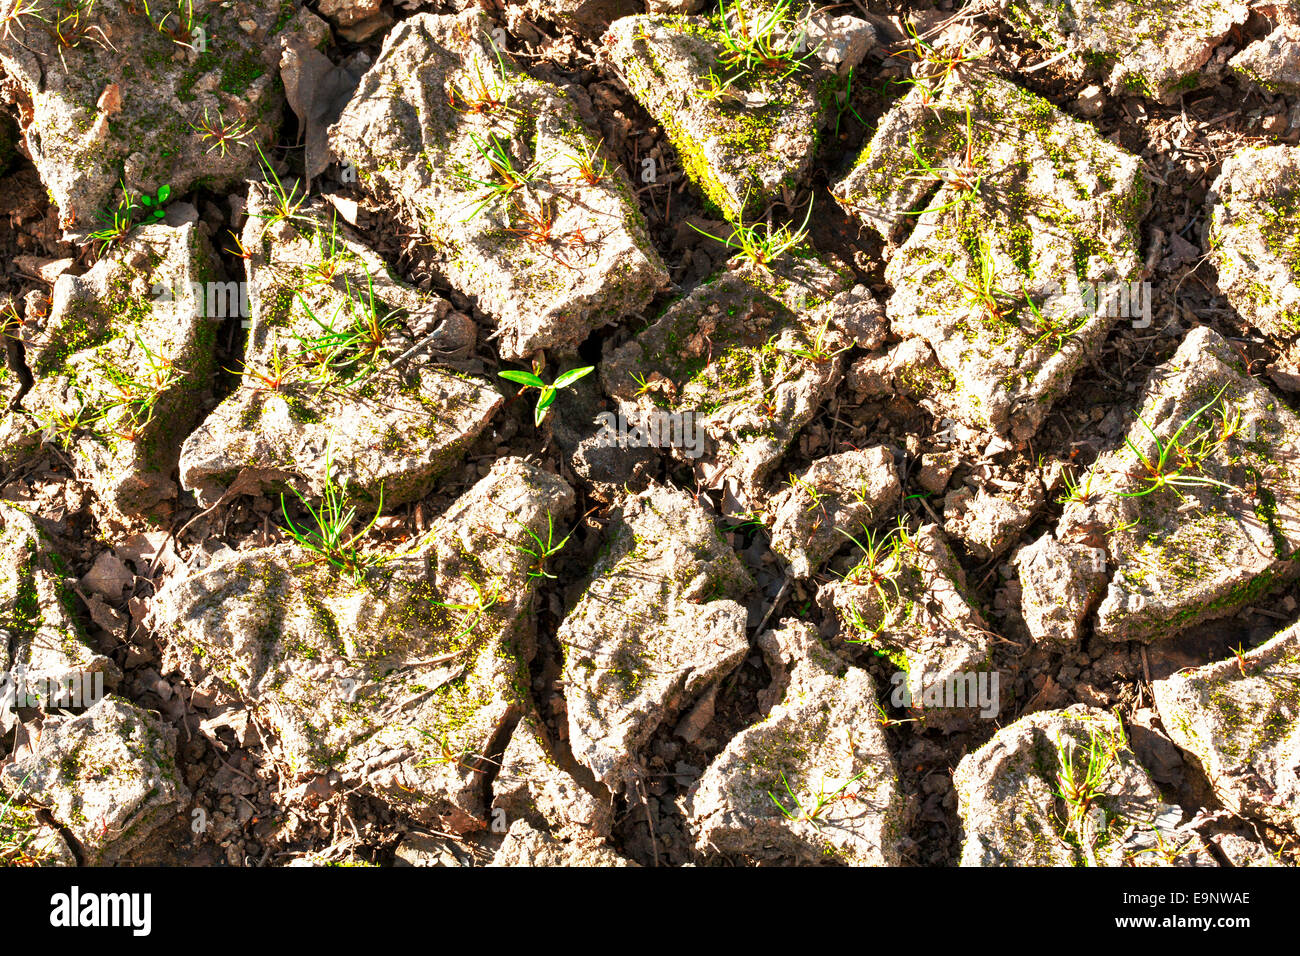 Image of parched farm land showing failed crop. Stock Photo